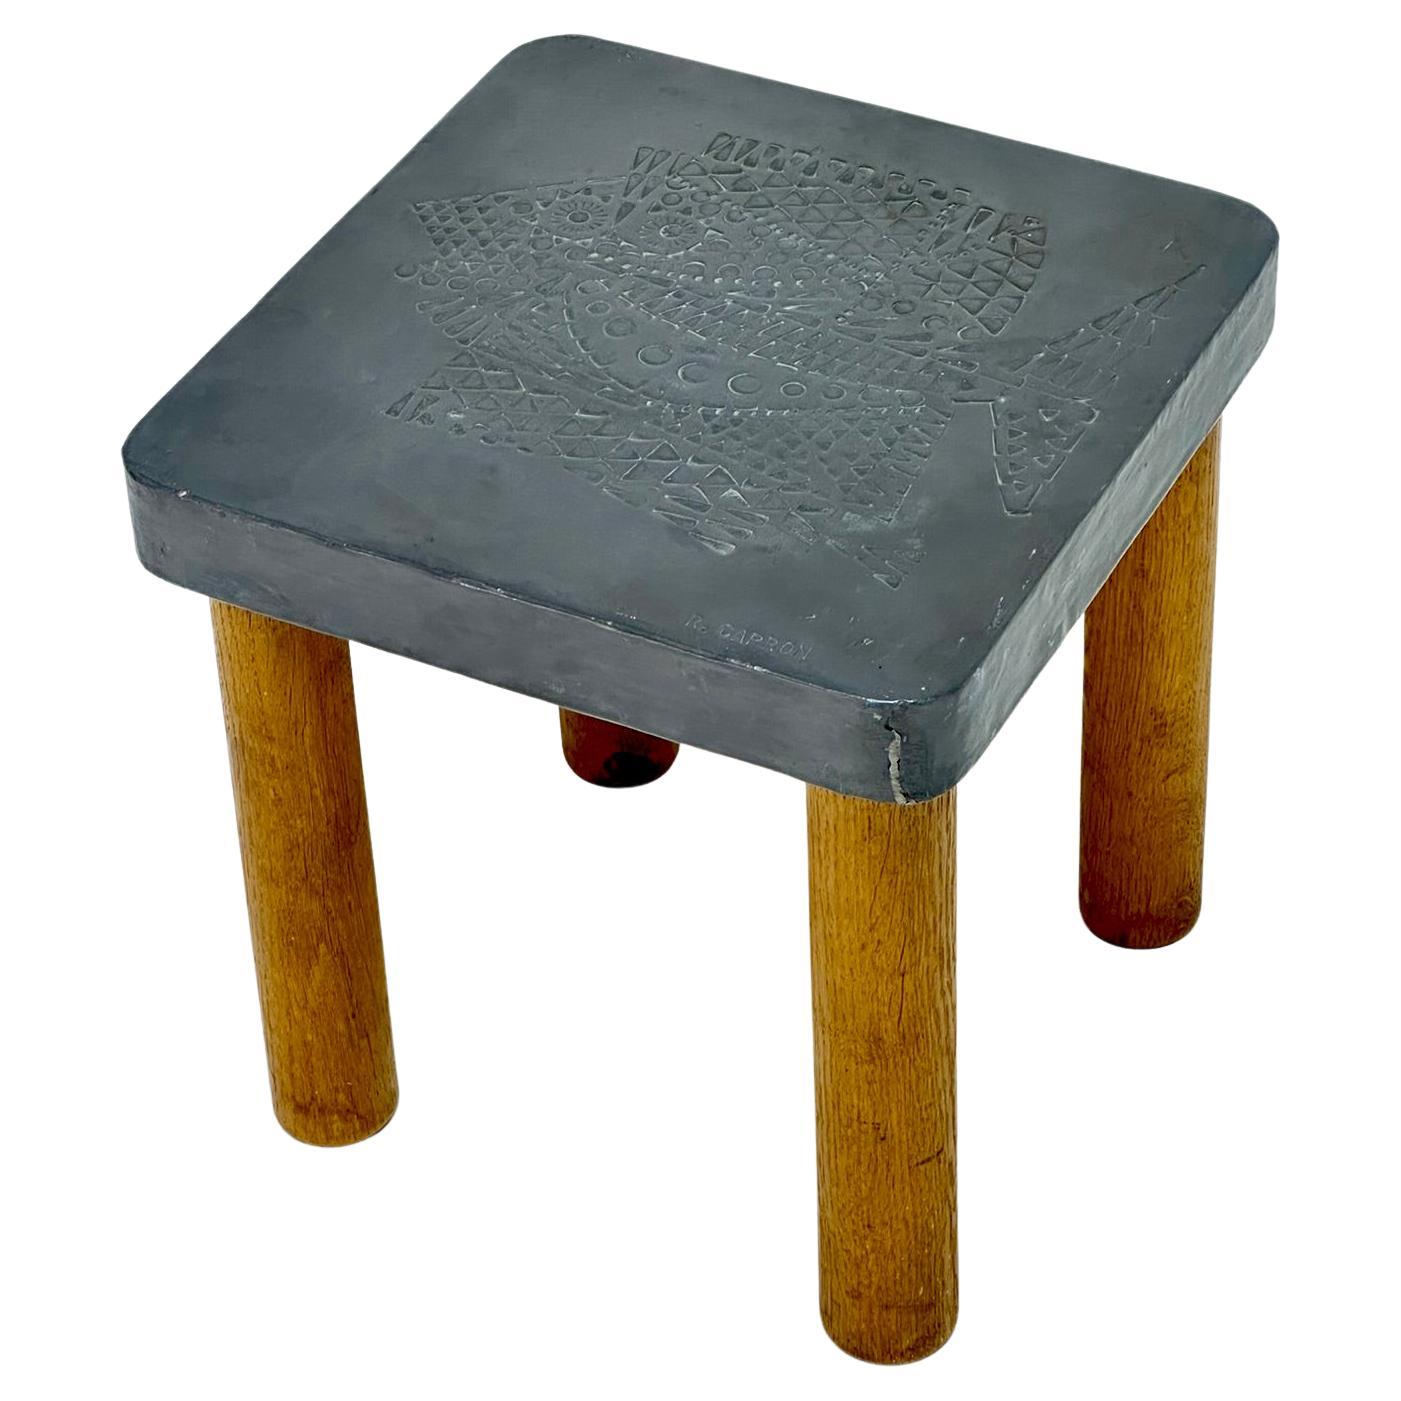 Lead Low Table, Roger Capron, Vallauris c. 1968